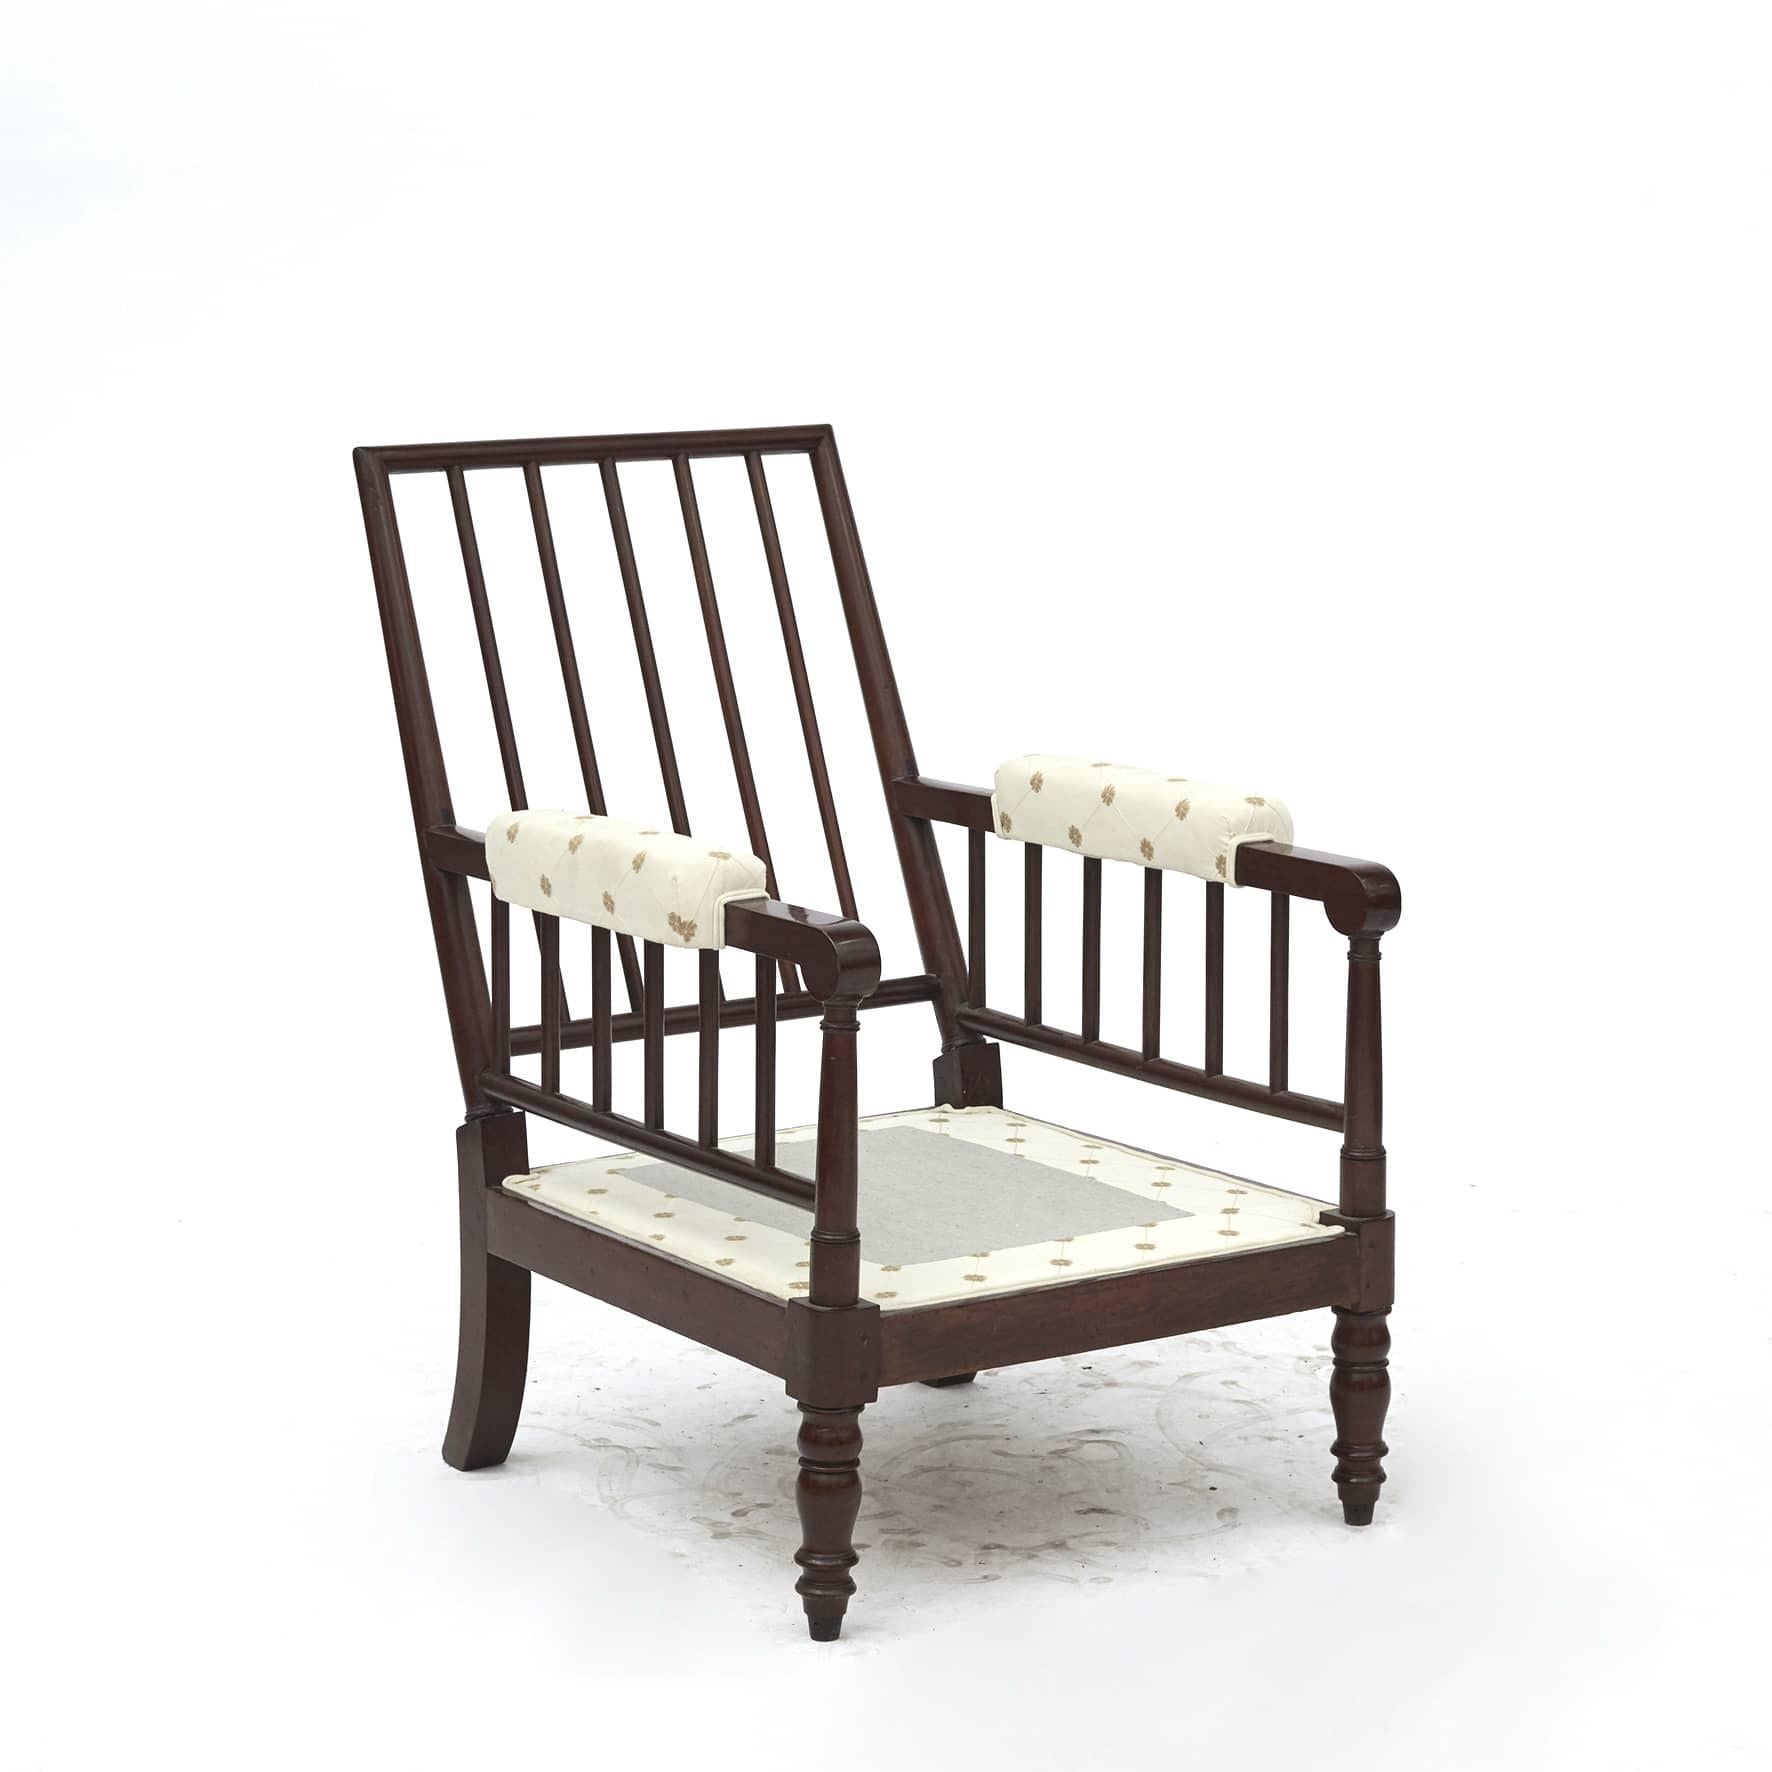 Regency Mahogany Armchair, England Approx. 1810 - 1820 For Sale 3